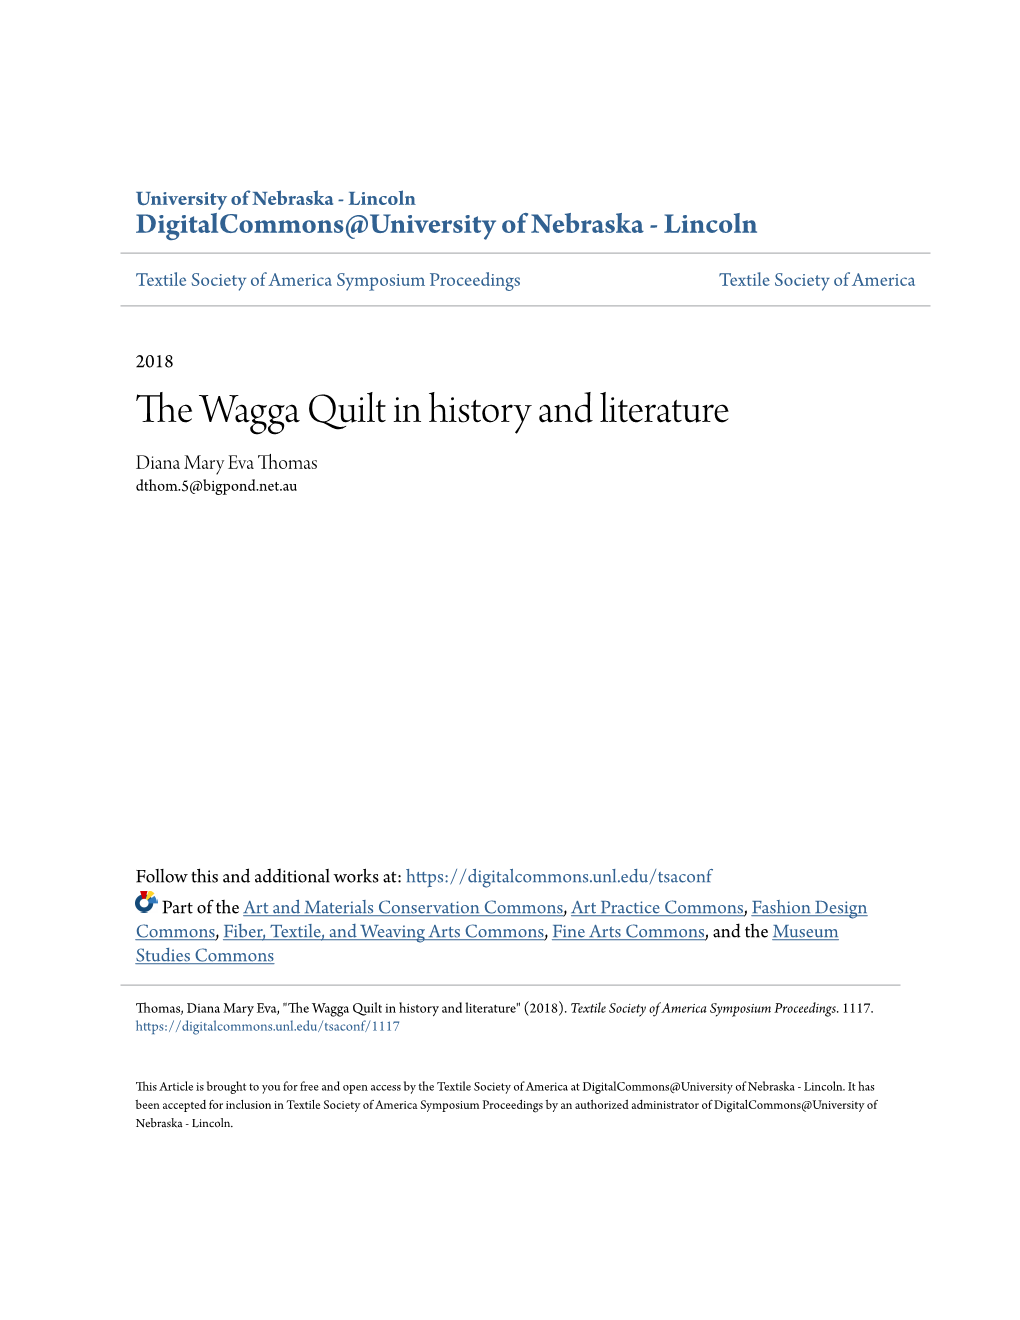 The Wagga Quilt in History and Literature